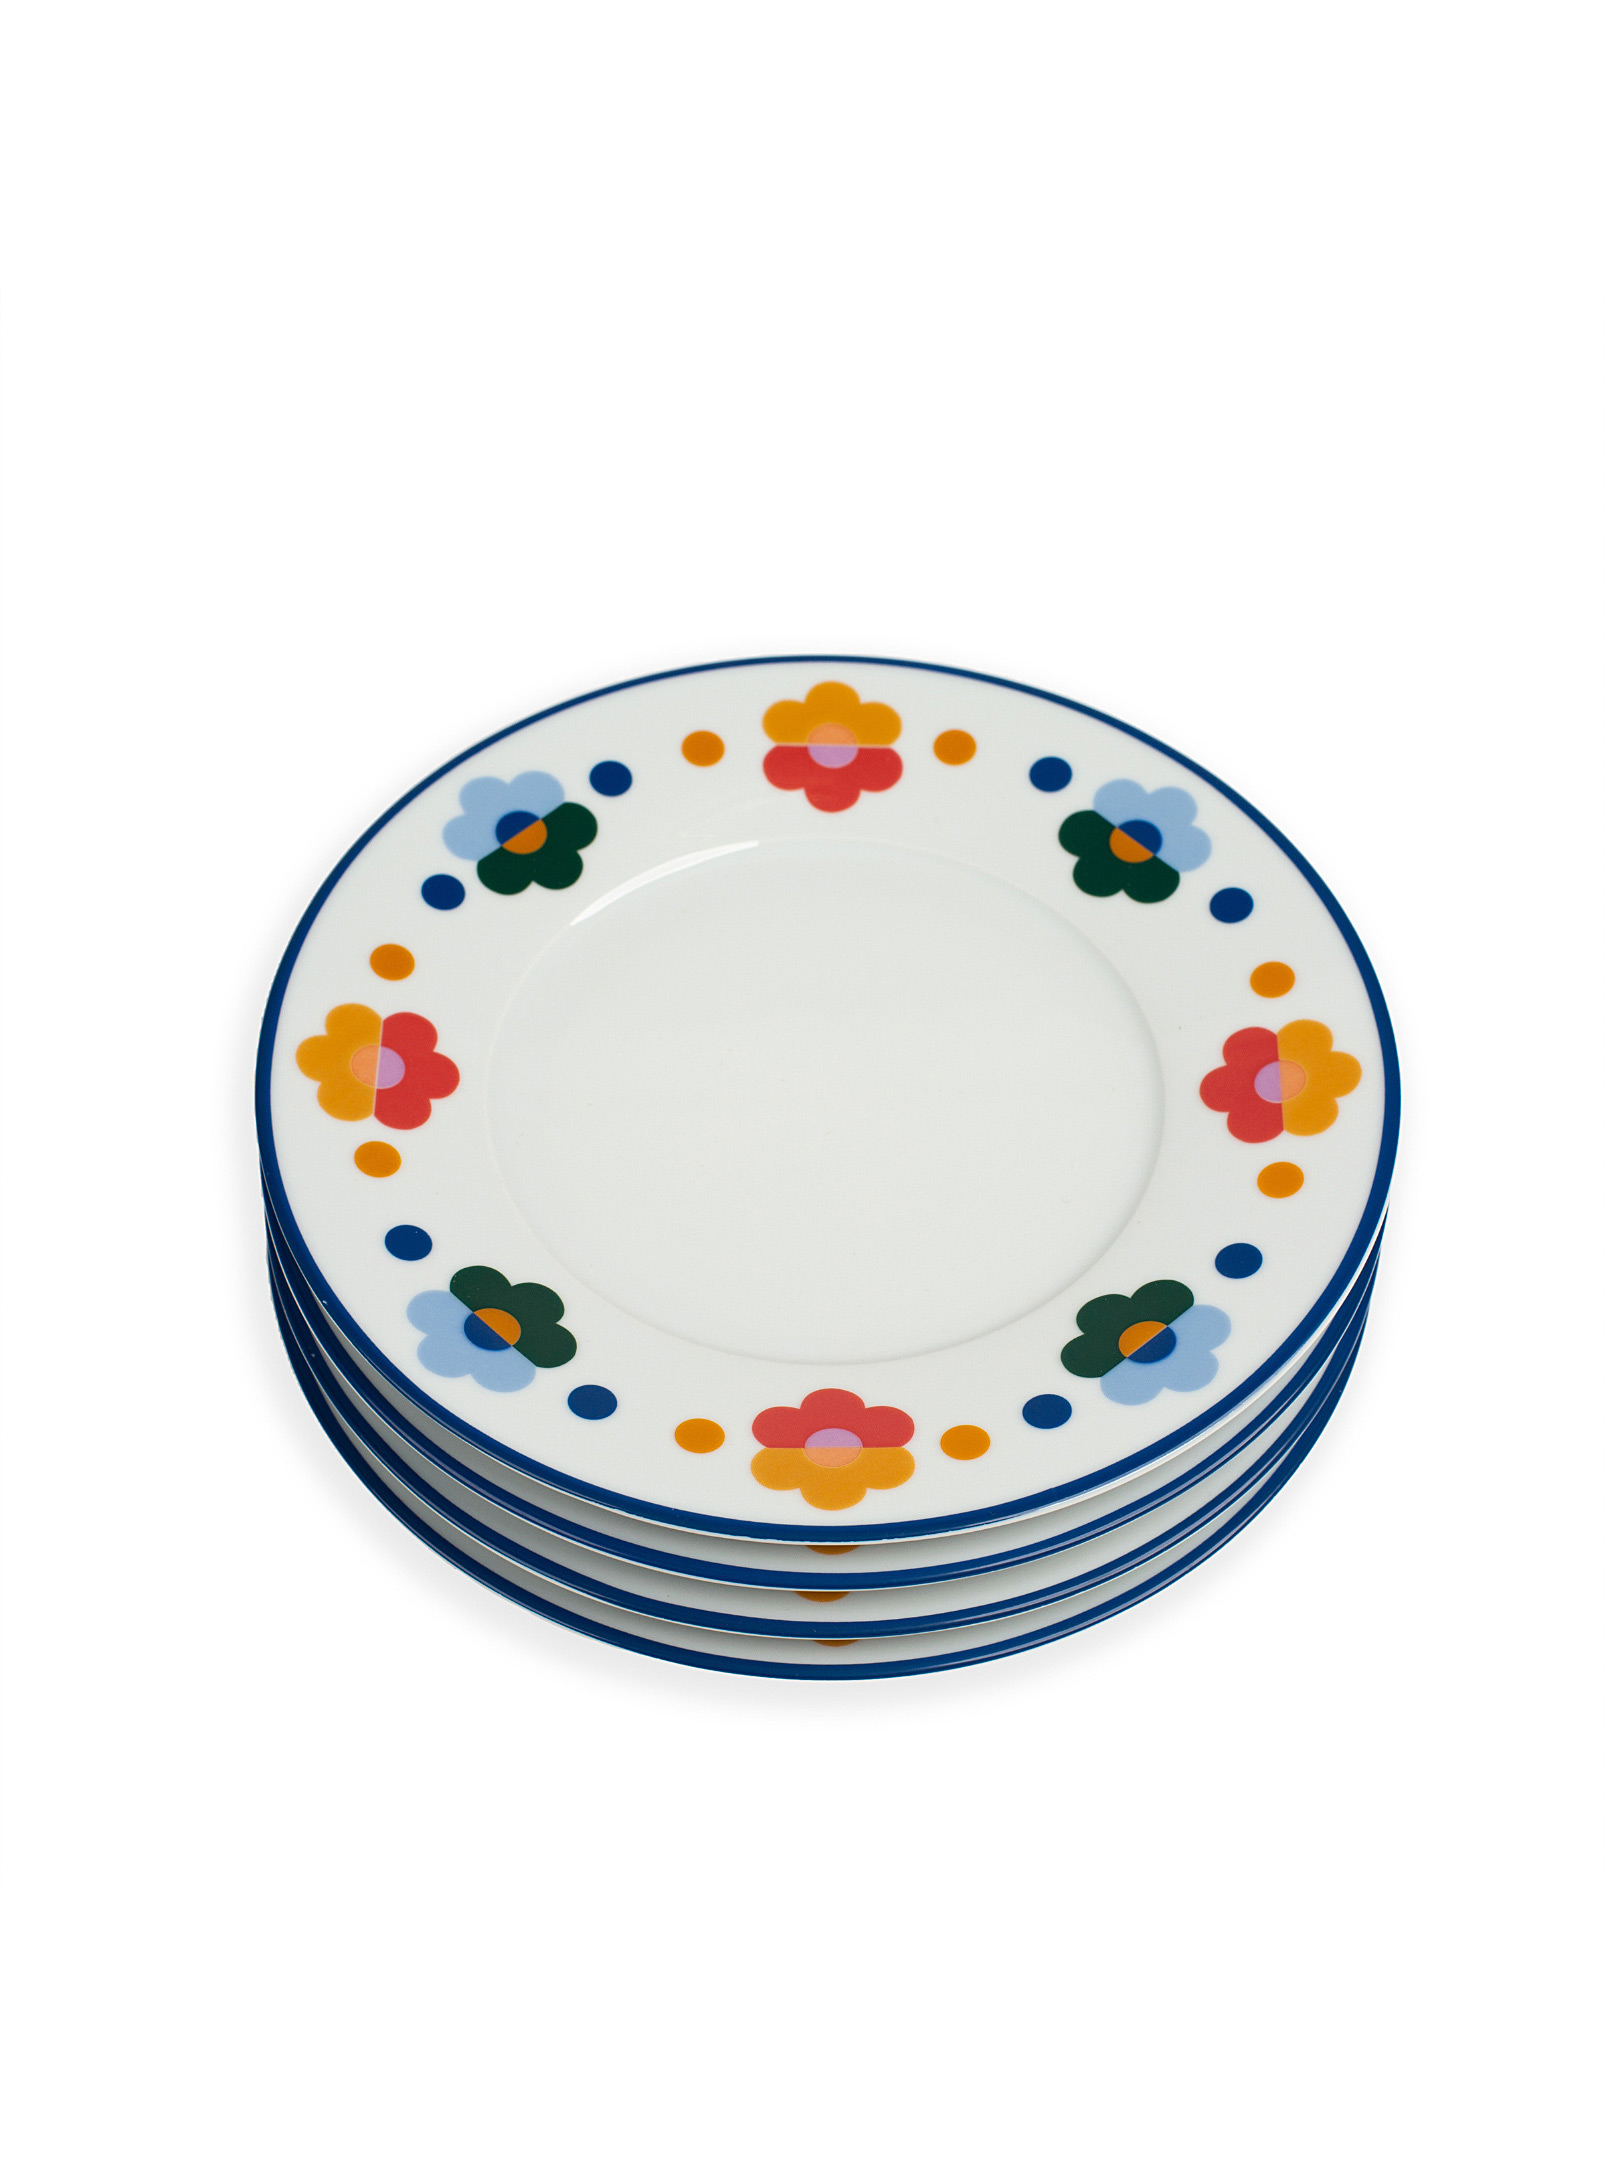 Misette Retro Flowers Salad Plates Set Of 4 In Assorted